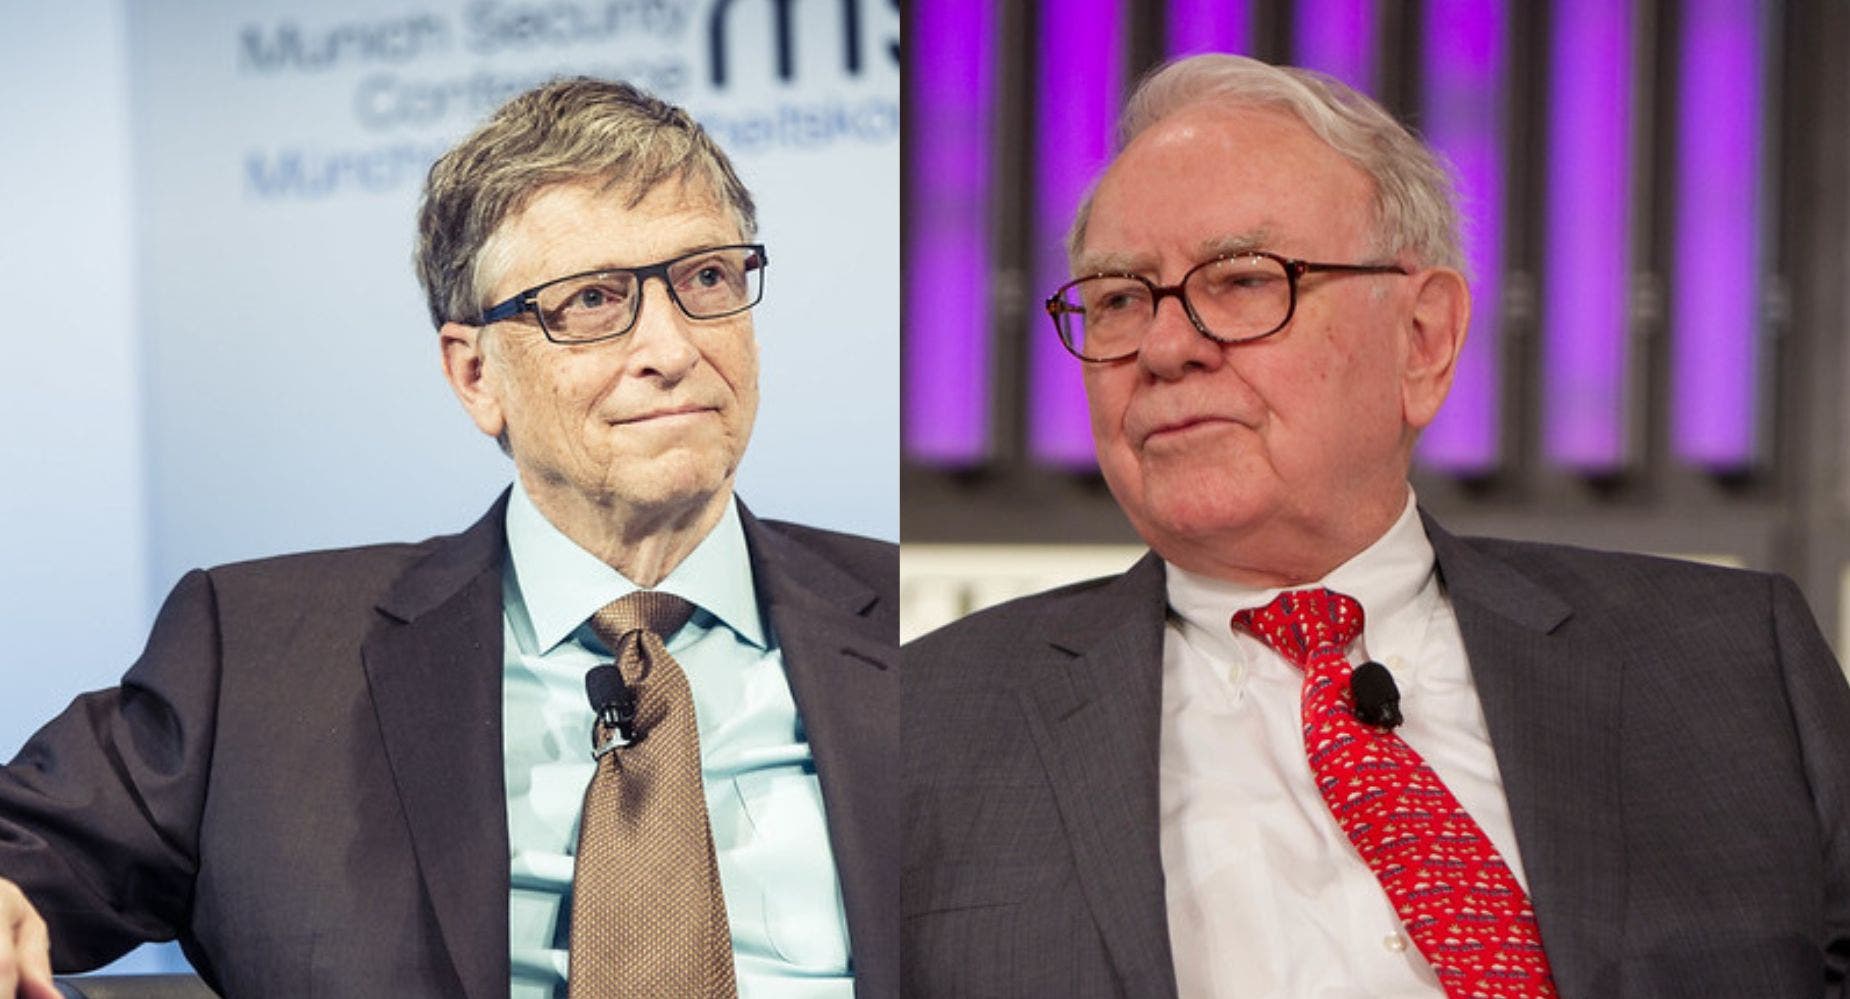 Bill Gates Still Moved To Tears By Warren Buffett Philanthropy: Here's How Many Berkshire Hathaway Shares Were Donated